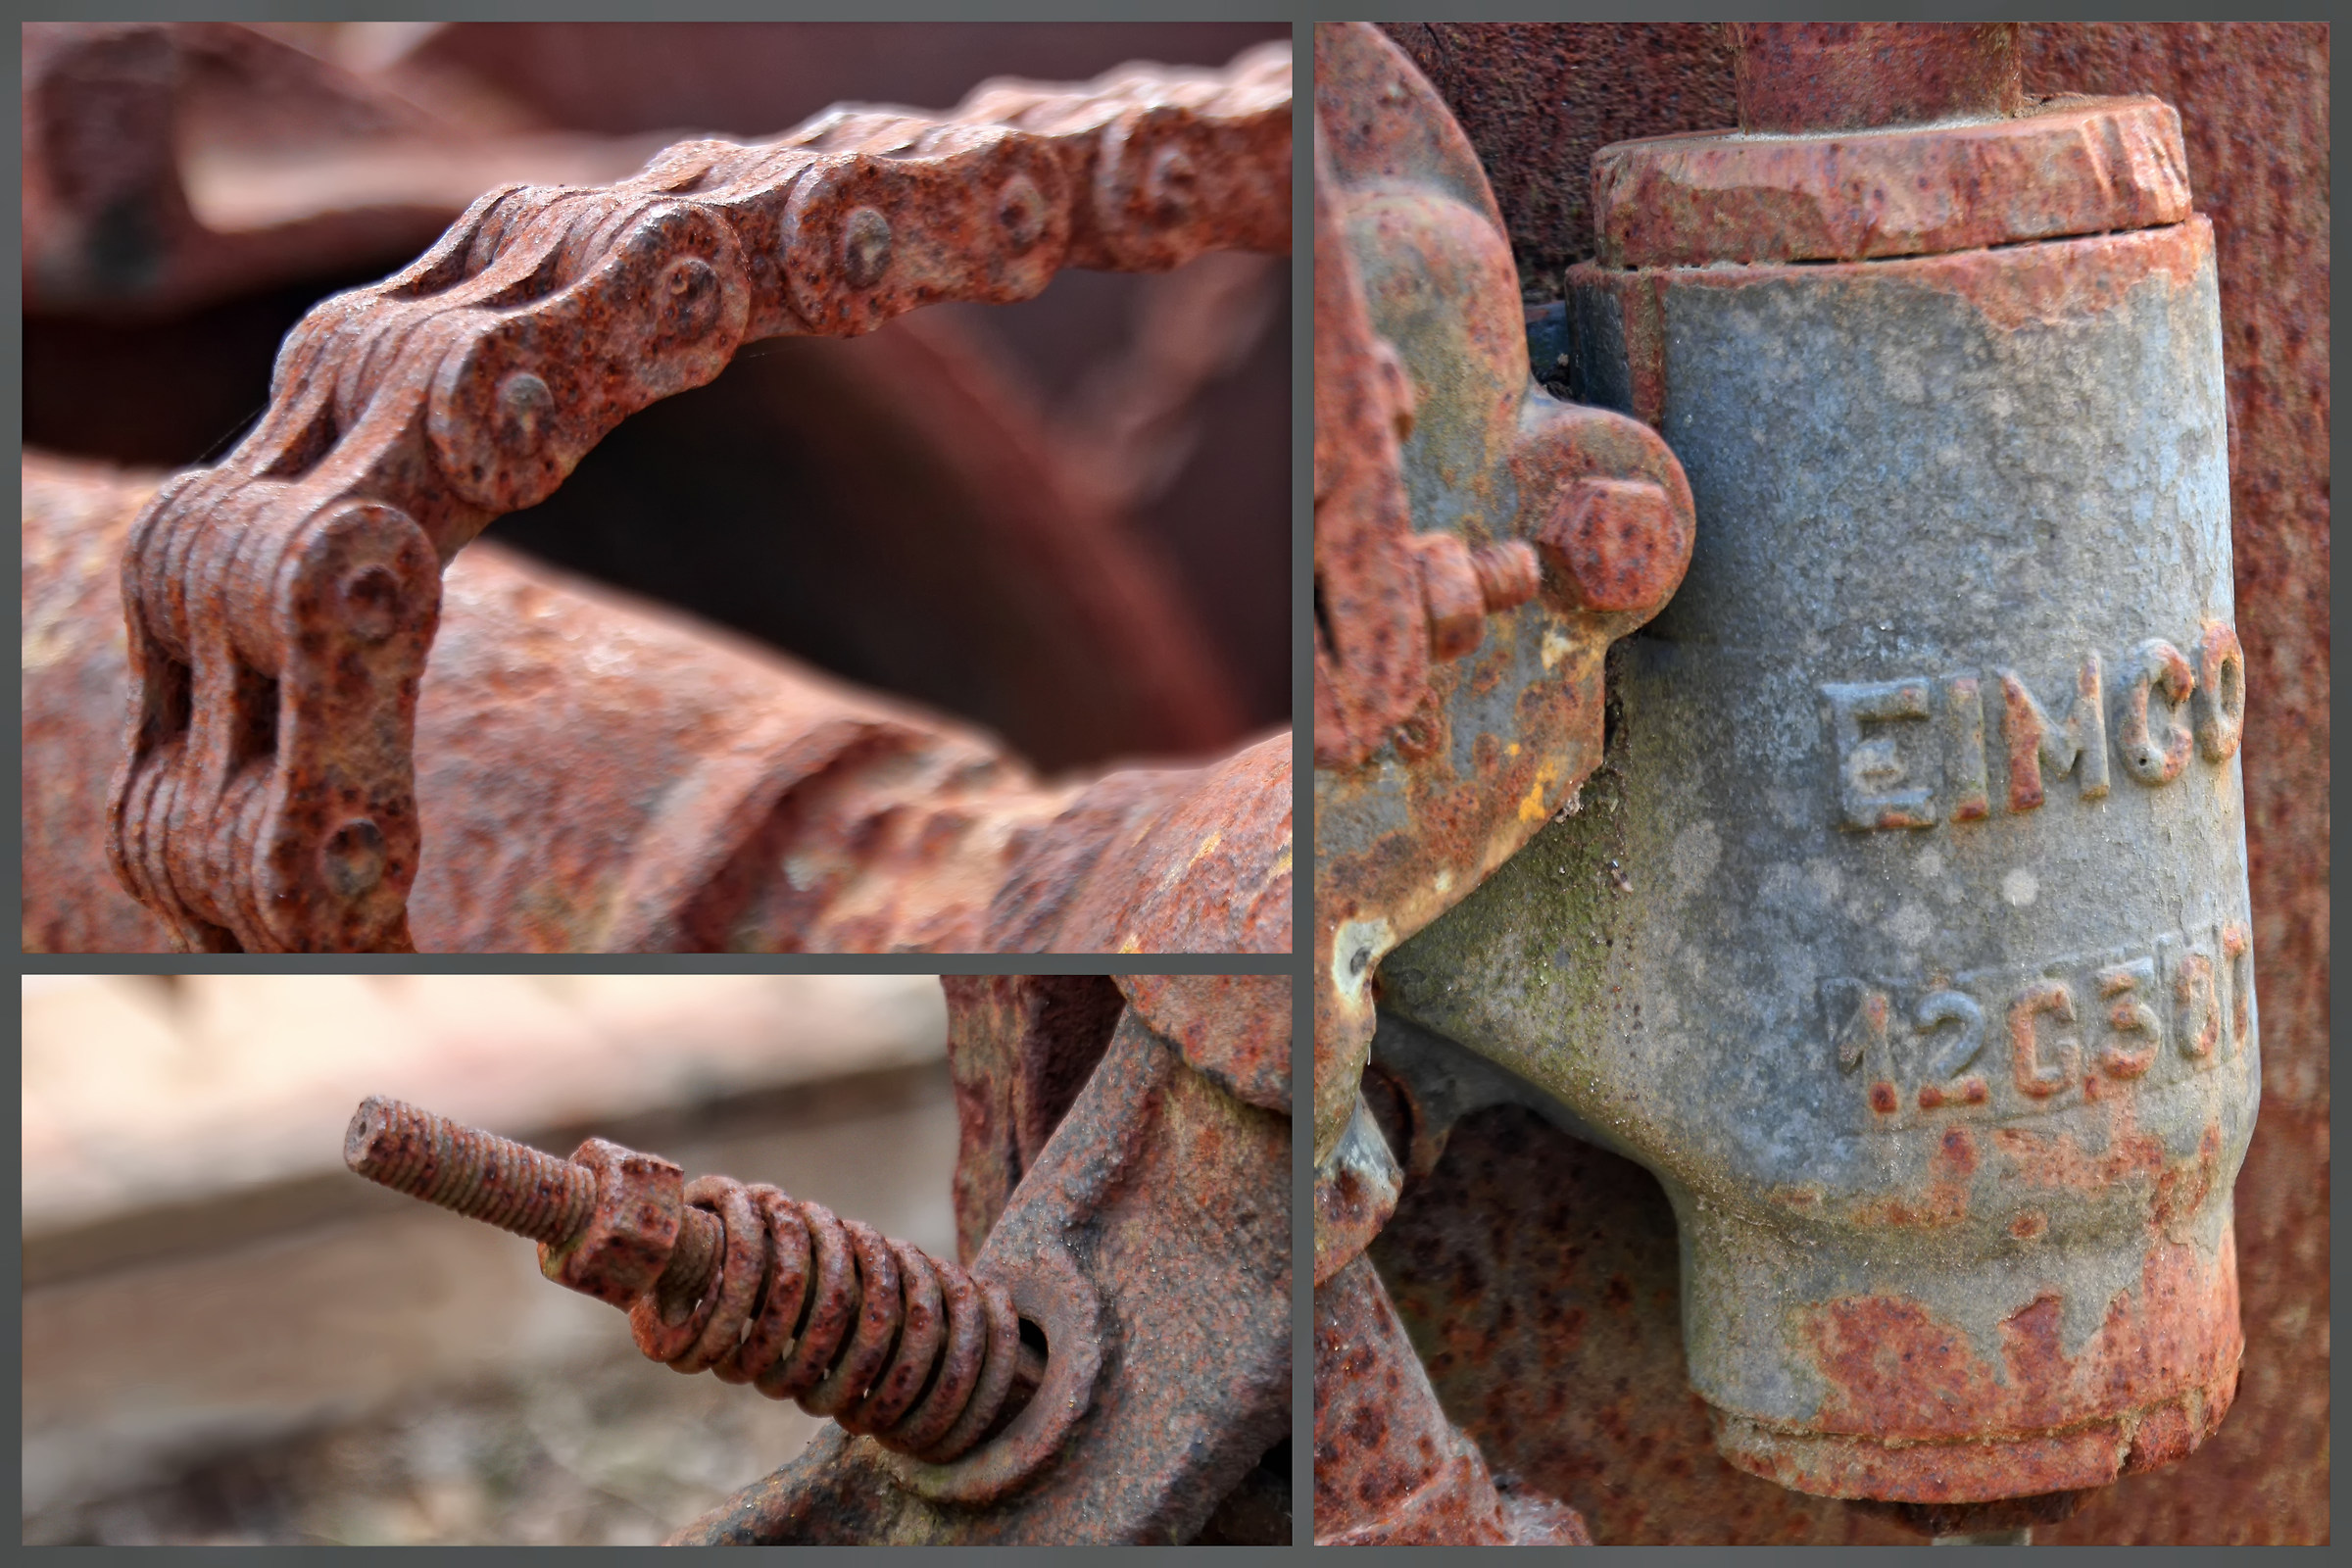 Past in the rust...